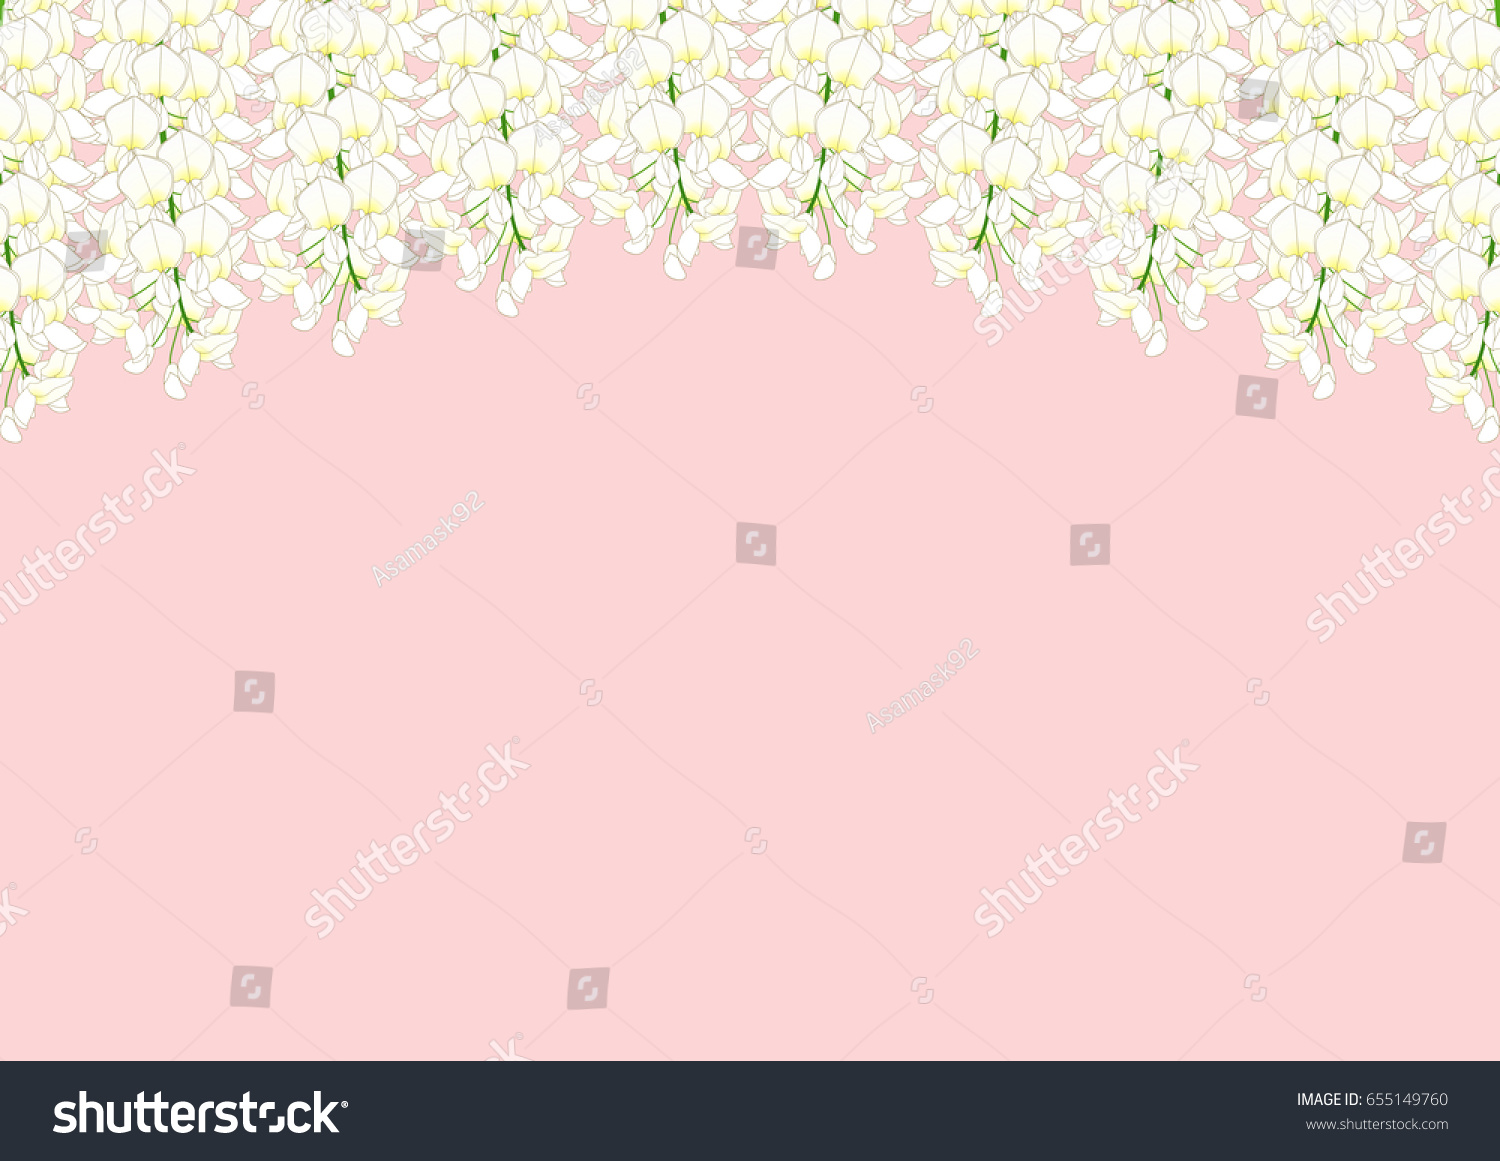 SVG of White Wisteria isolated on Pink Background with copy space. Vector Illustration. svg